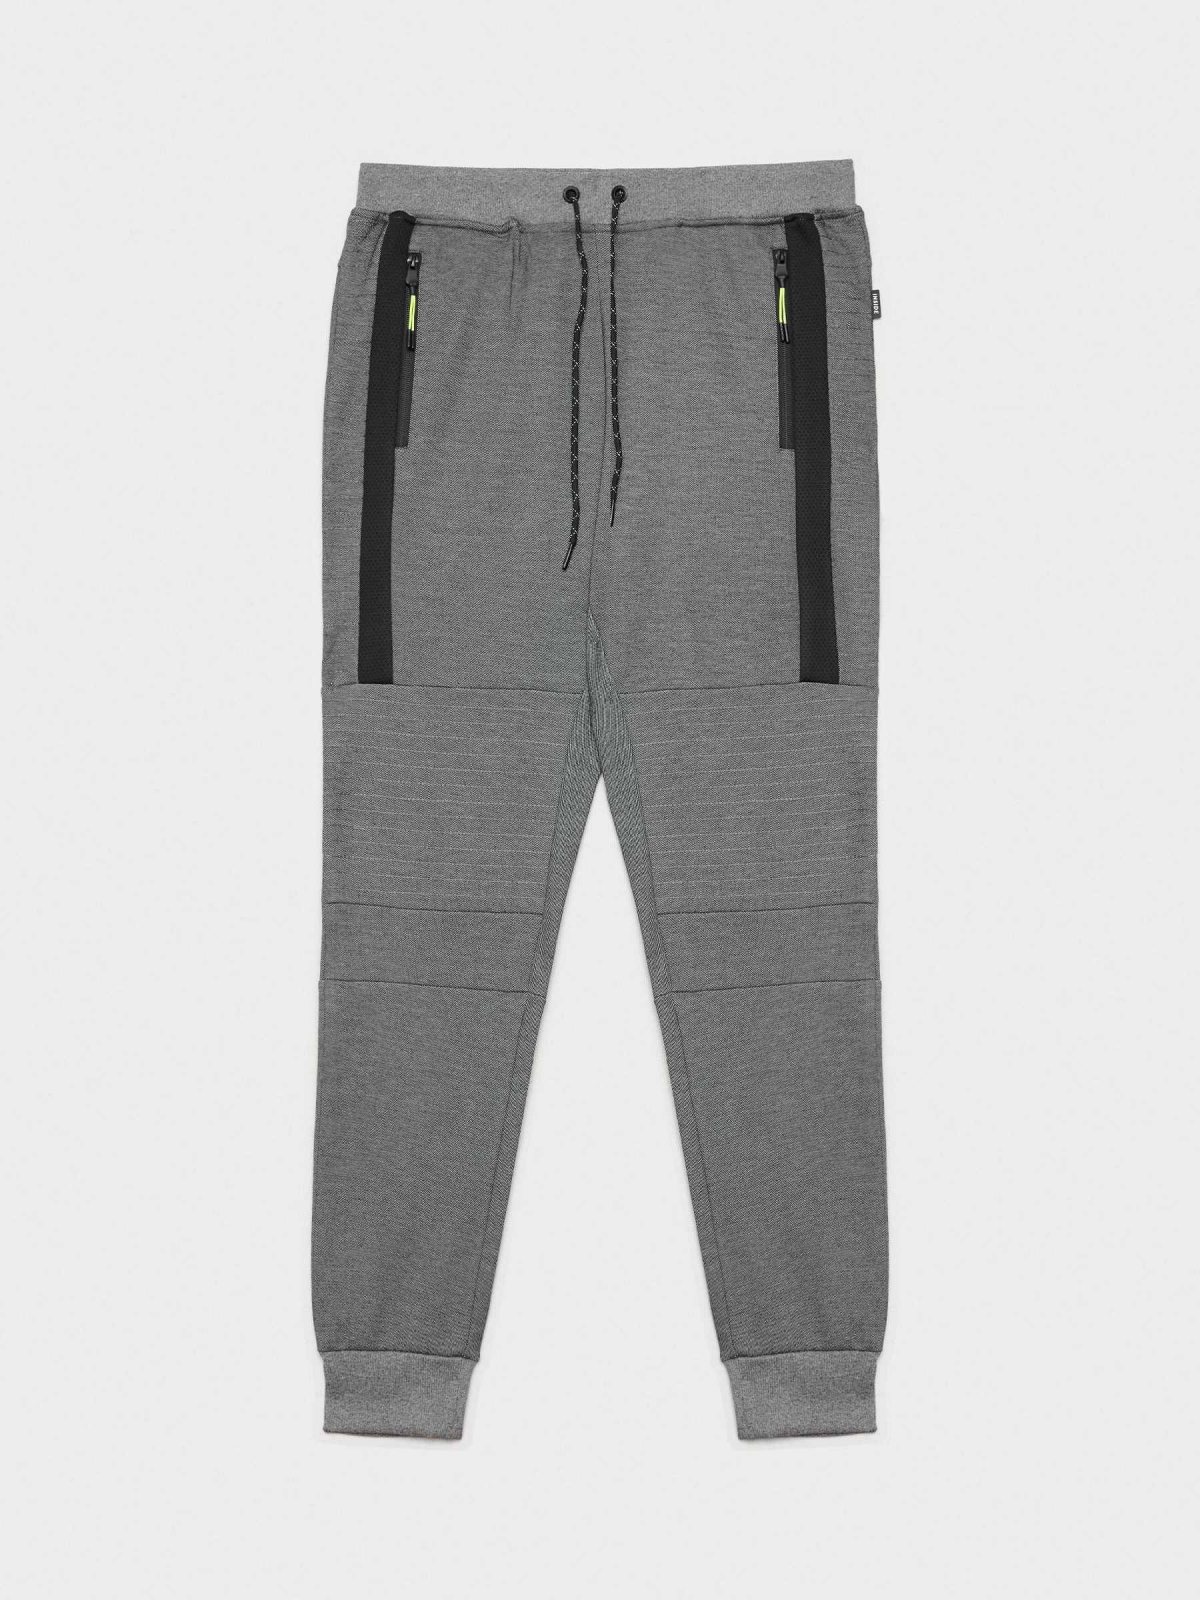  Jogger pants with zippers grey